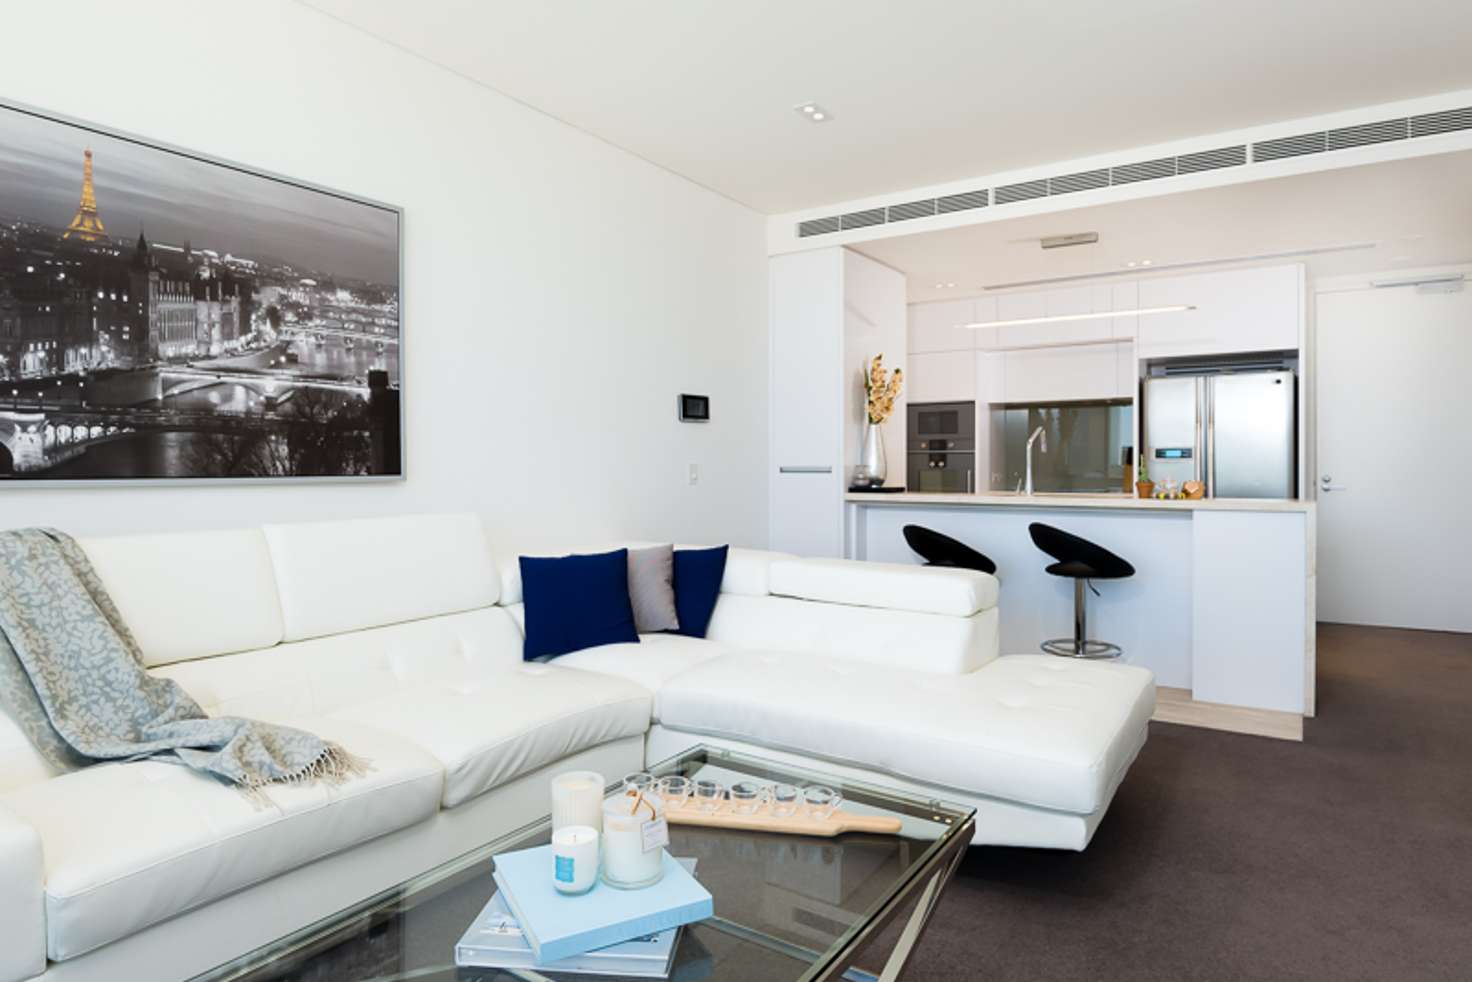 Main view of Homely apartment listing, 27/9 McCabe Street, North Fremantle WA 6159